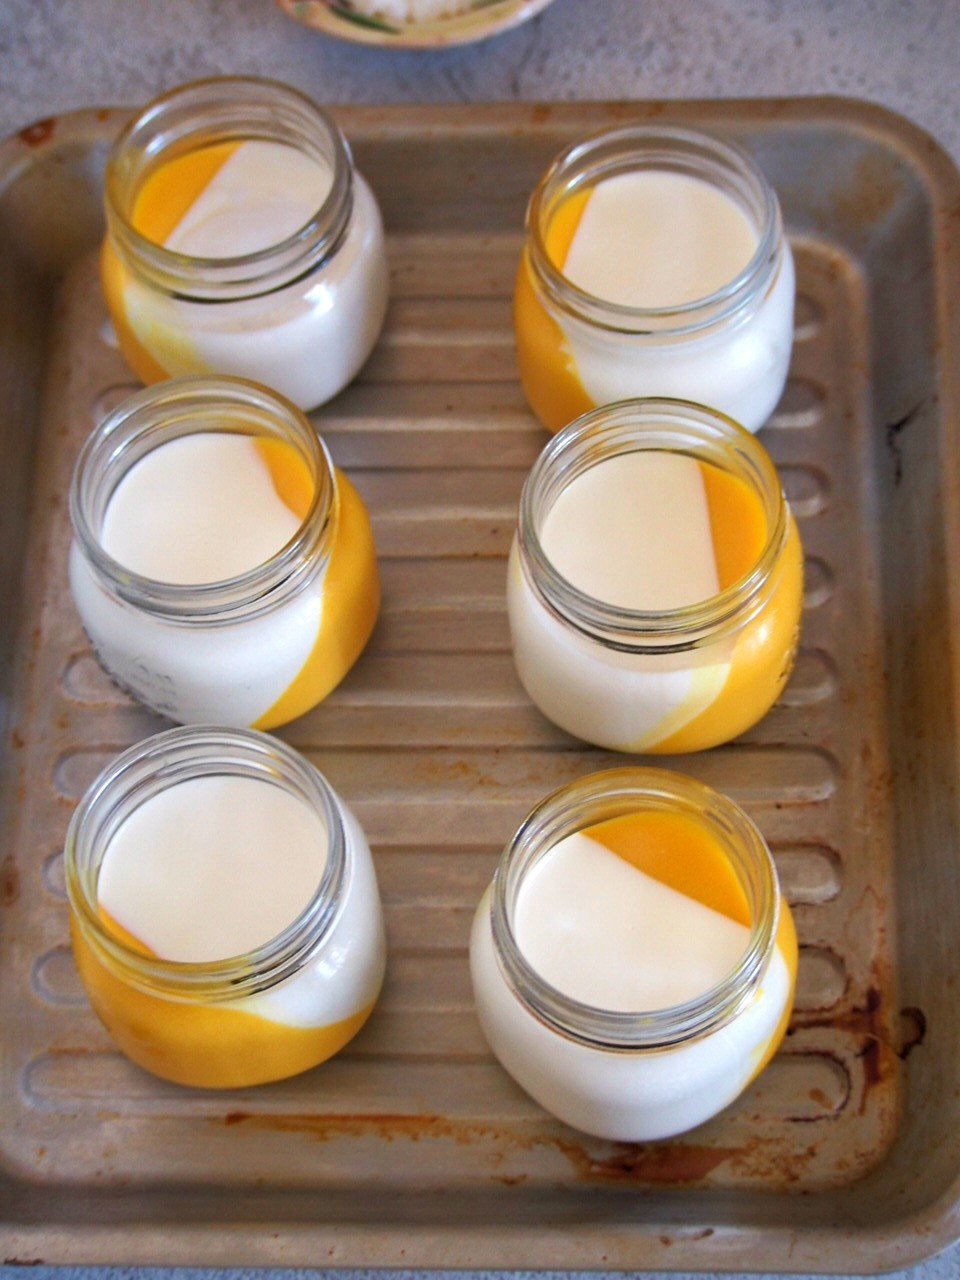 The coconut mango panna cotta all set and ready for the toppings.